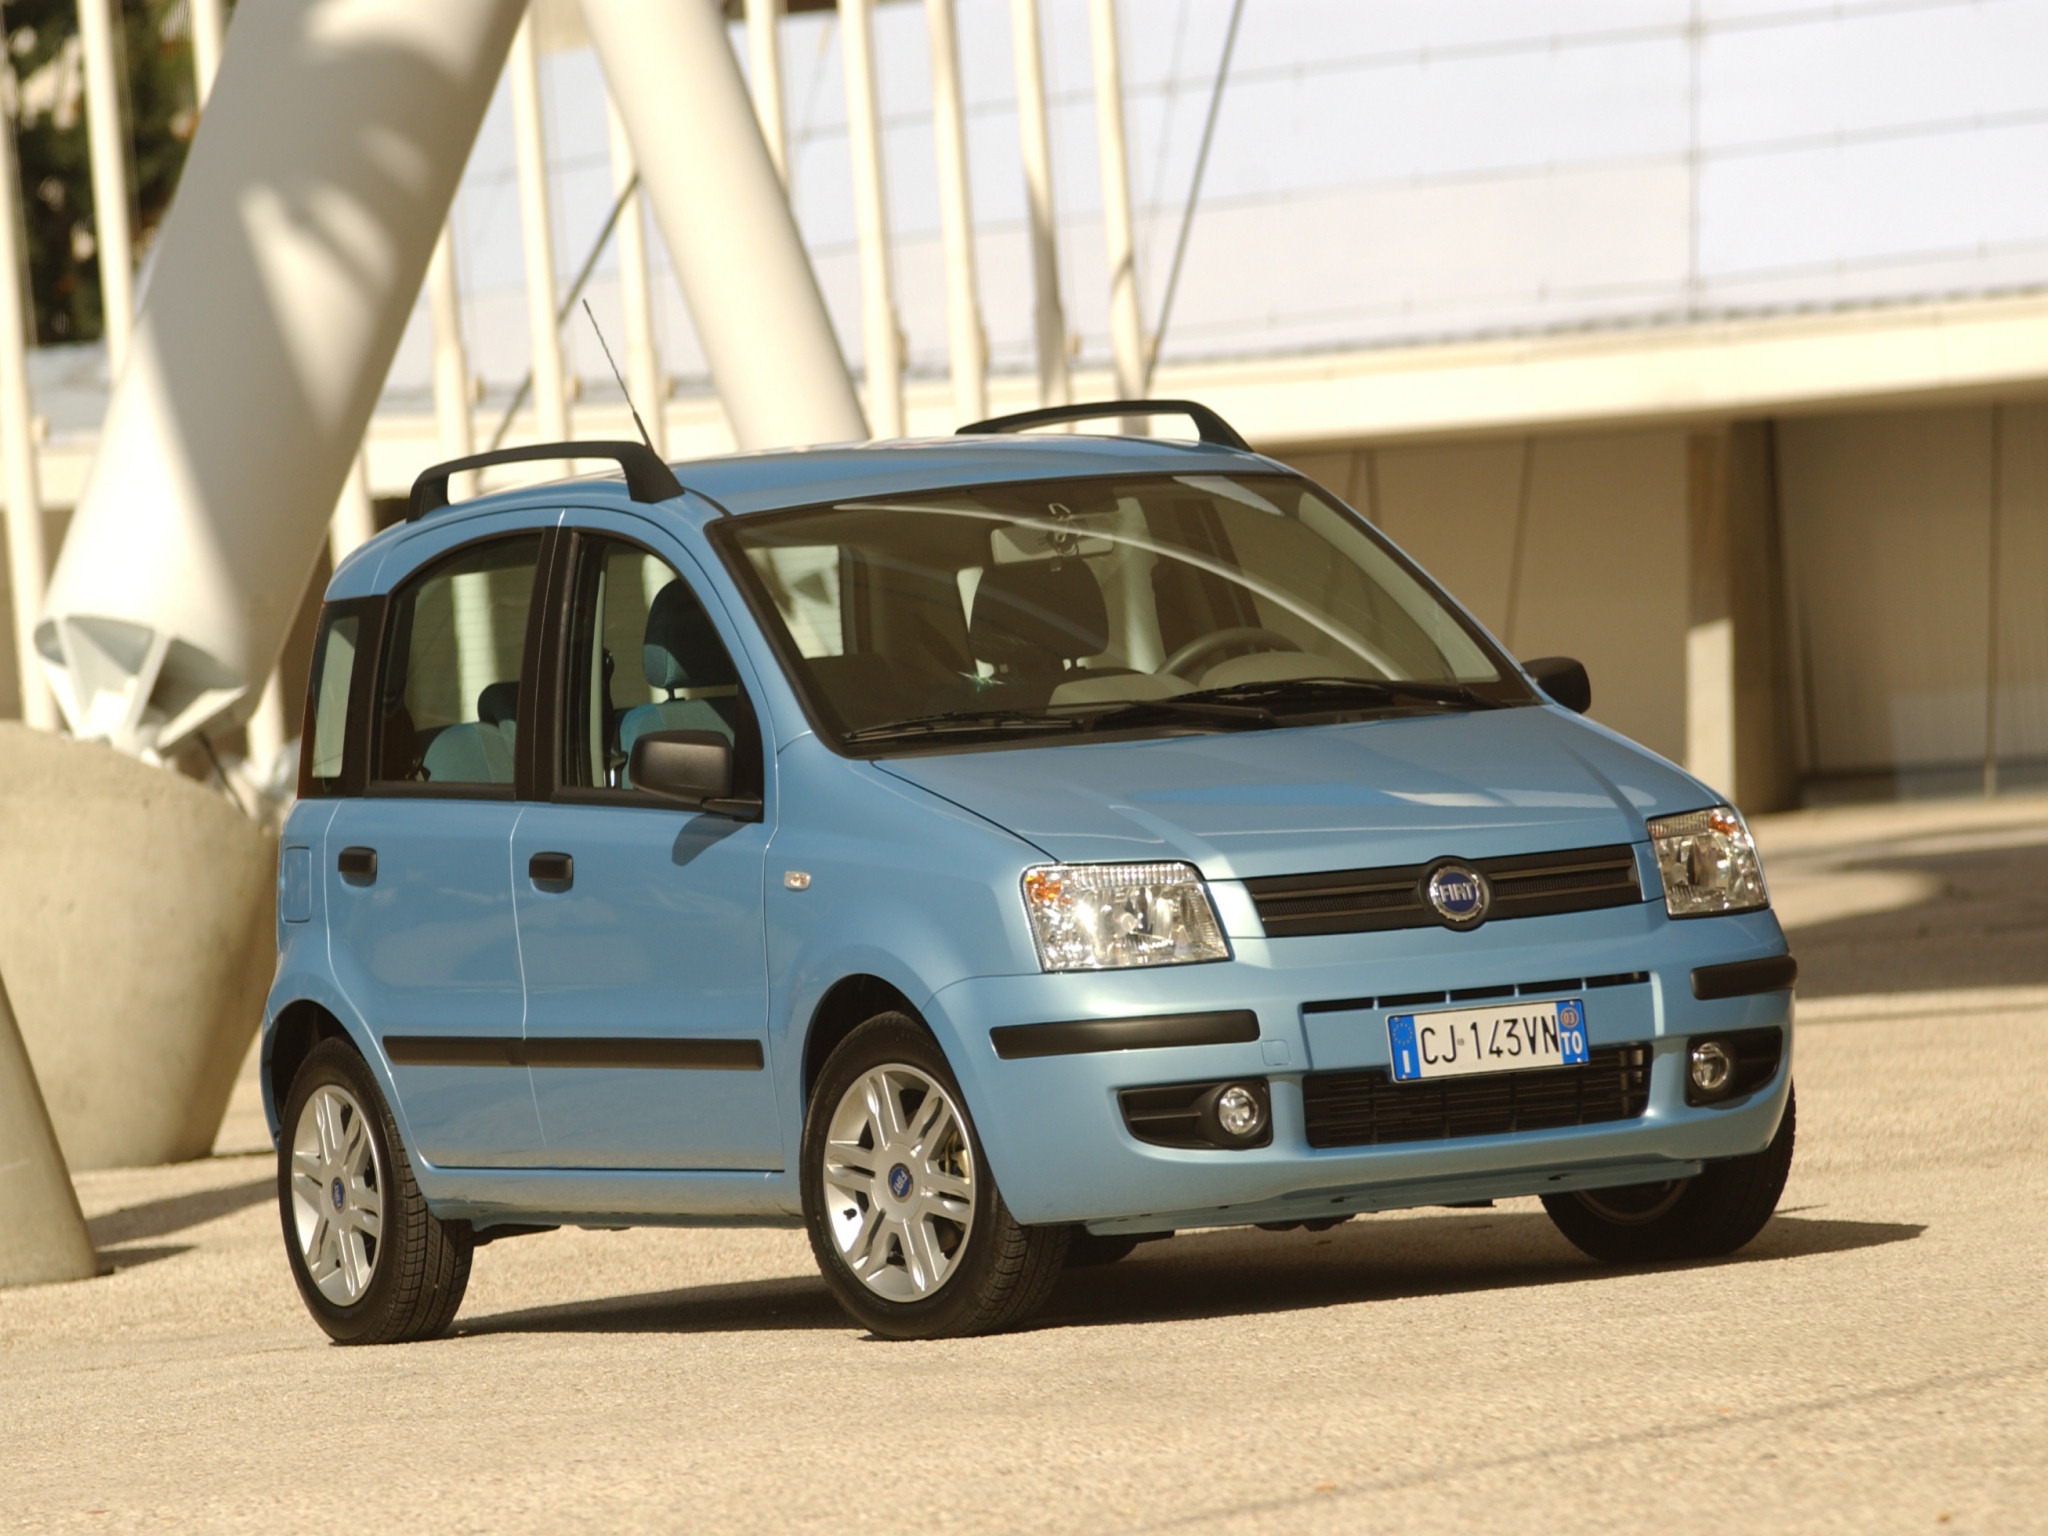 Car in pictures car photo gallery » Fiat Panda 2003 Photo 05